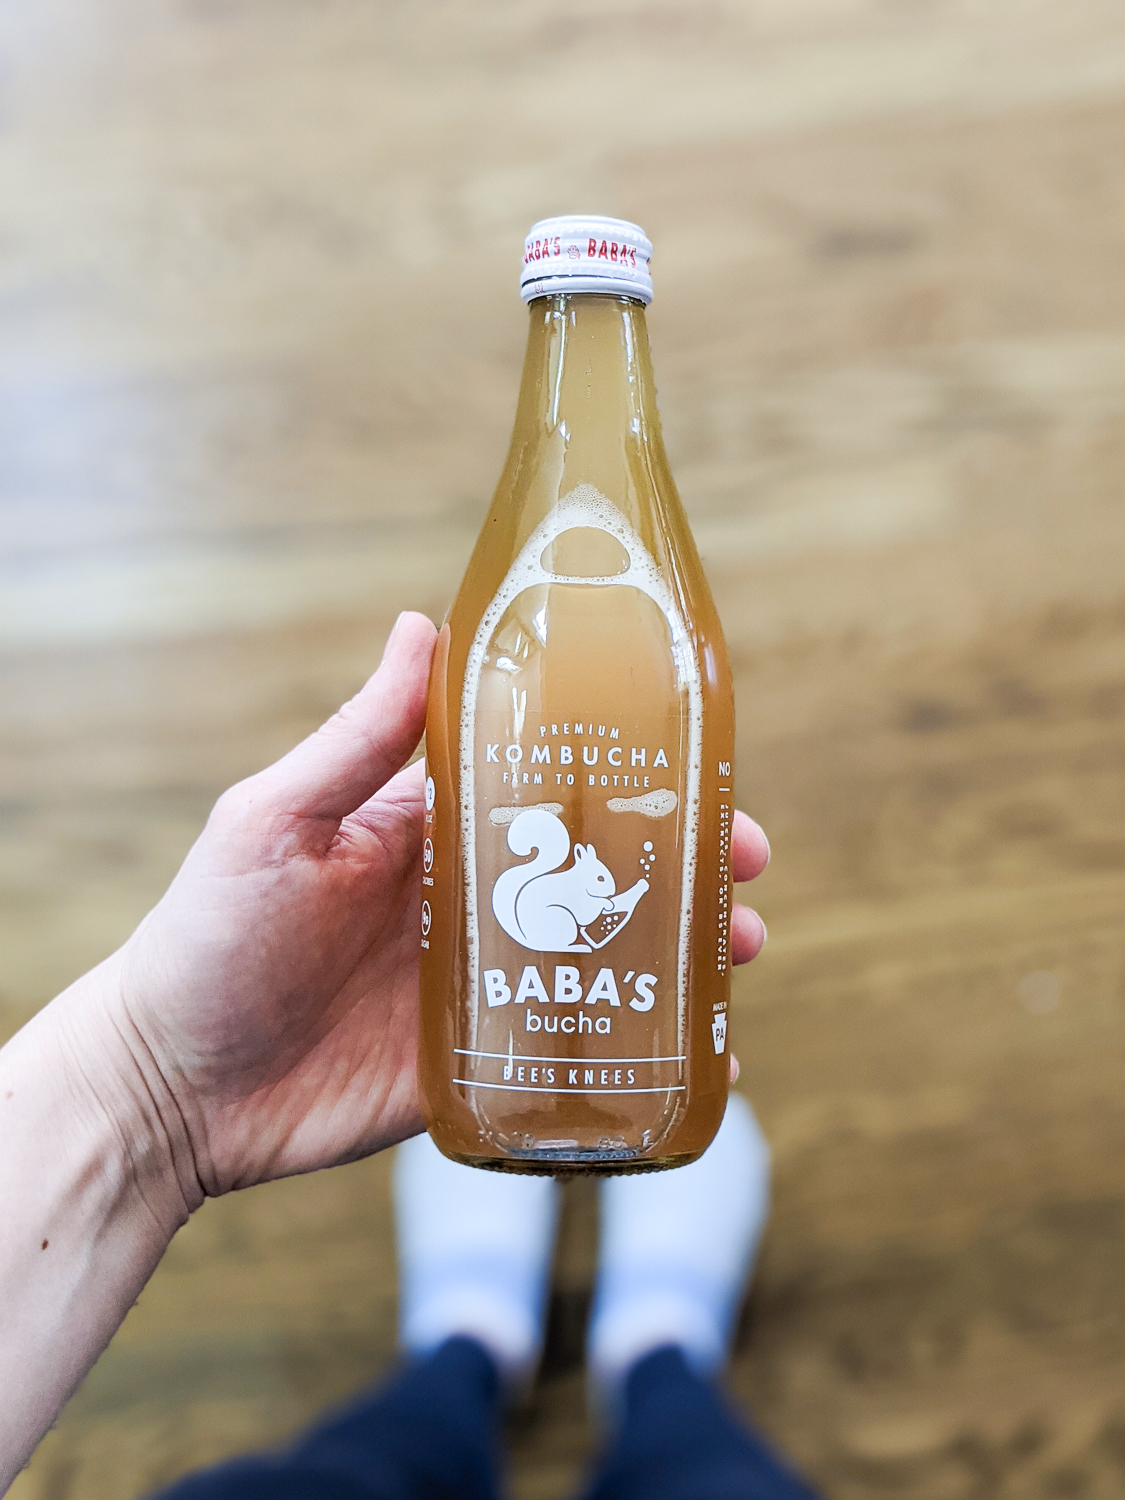 hand holding a bottle of Baba's Bucha in Bees Knees flavor